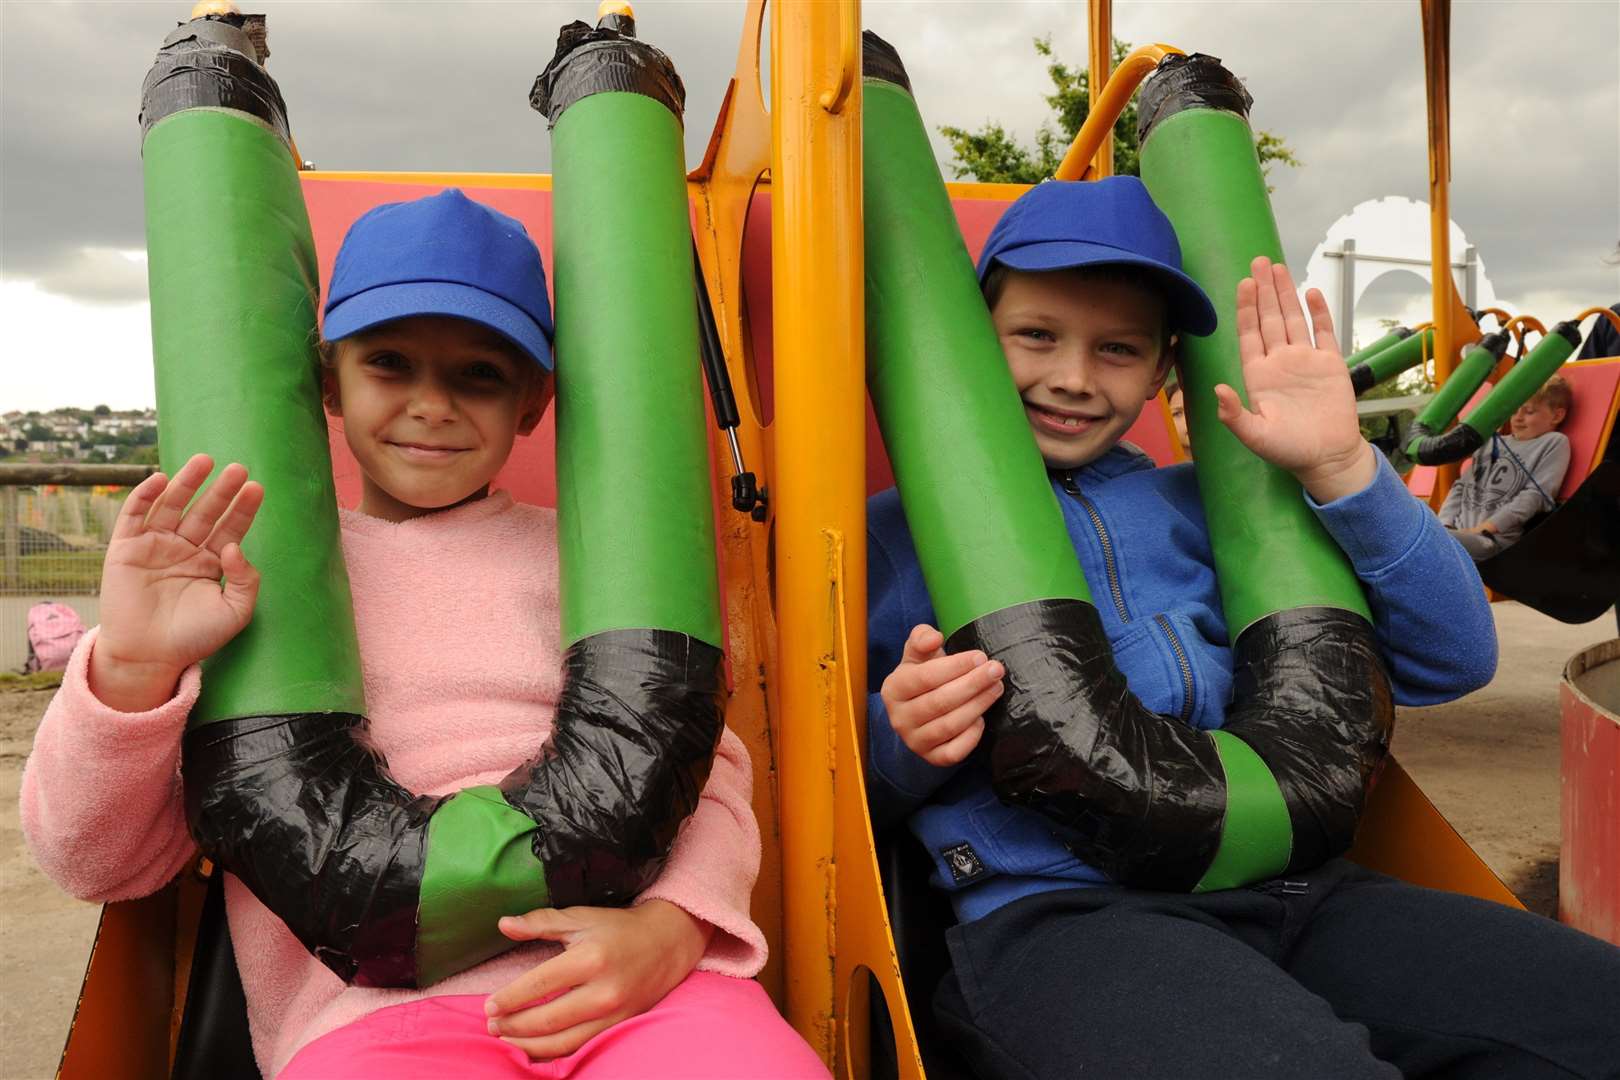 Children from Chernobyl during a visit to Diggerland in 2016. Pictured are Veronika and Andreya. Picture: Steve Crispe